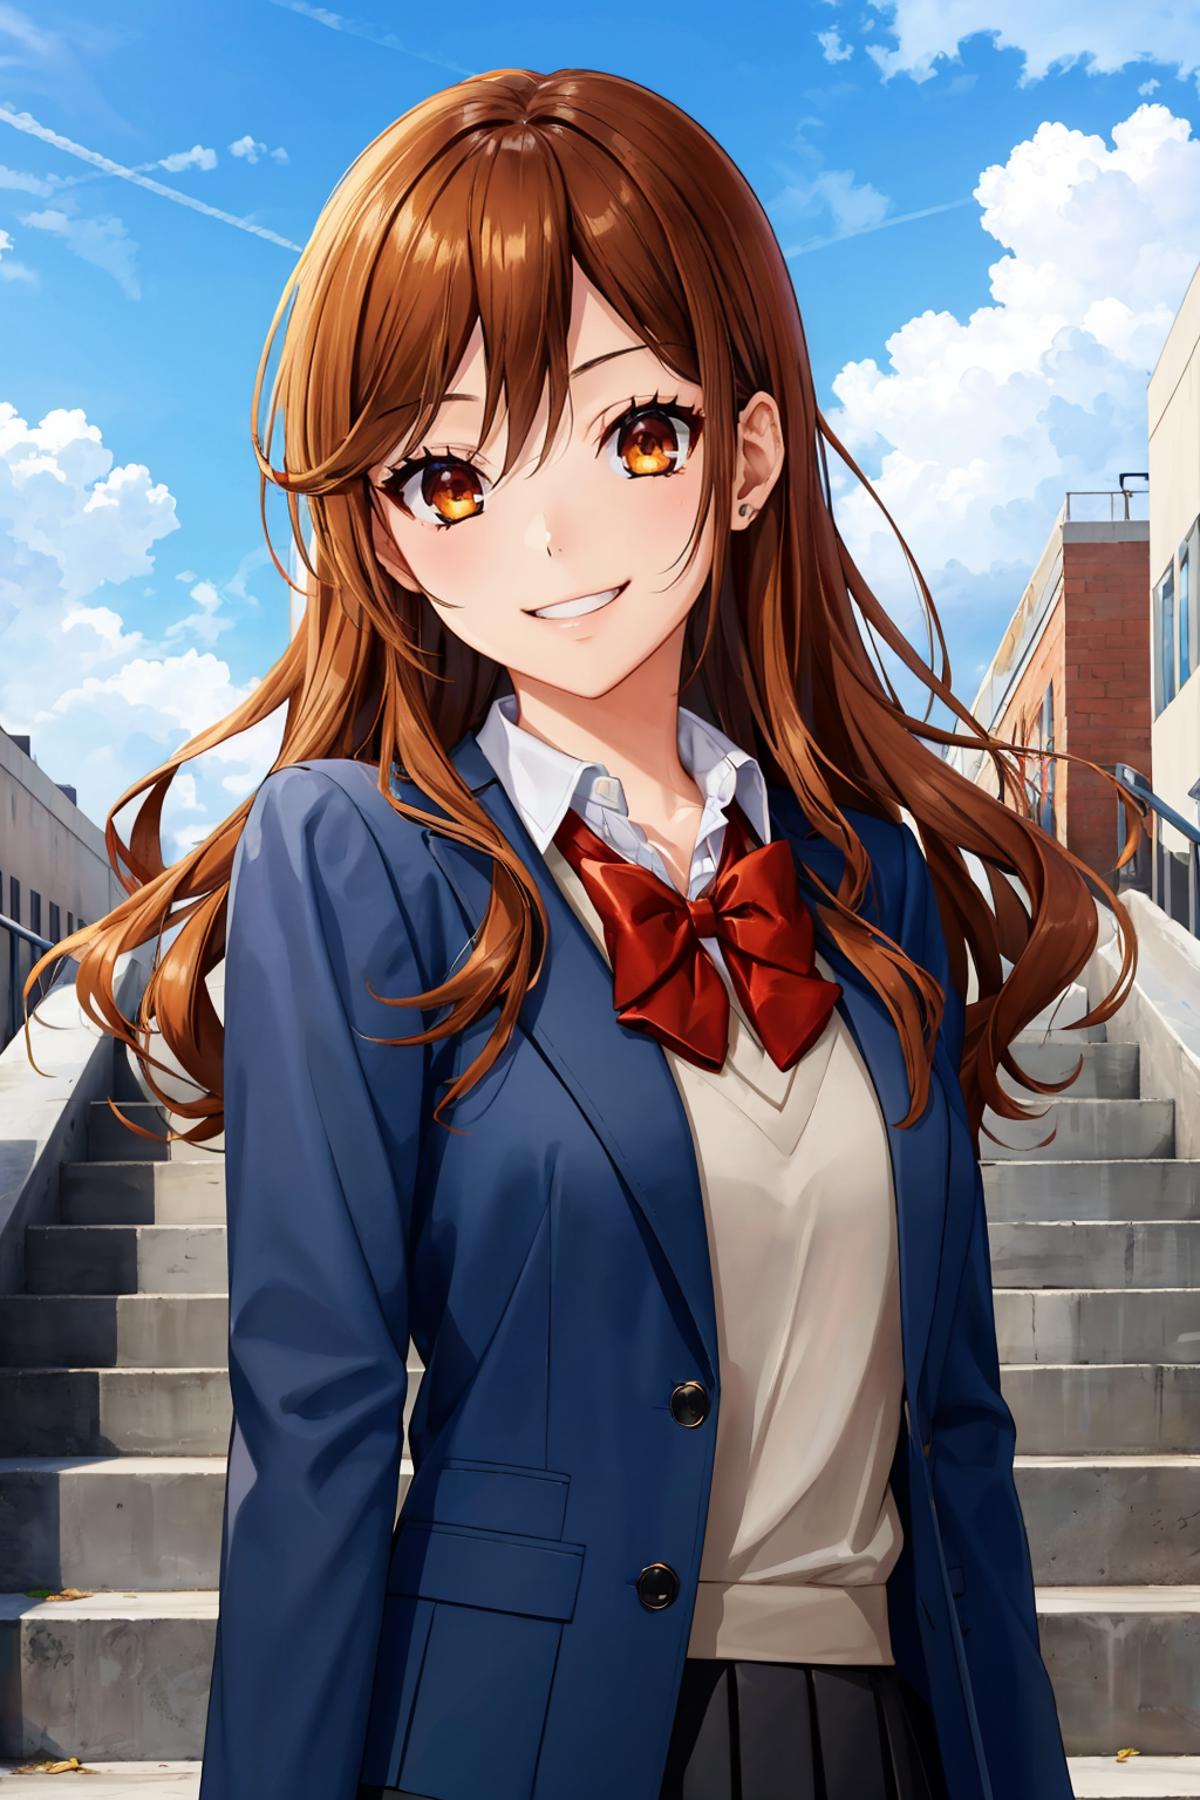 A smiling girl in a blue suit and red tie stands on a staircase.